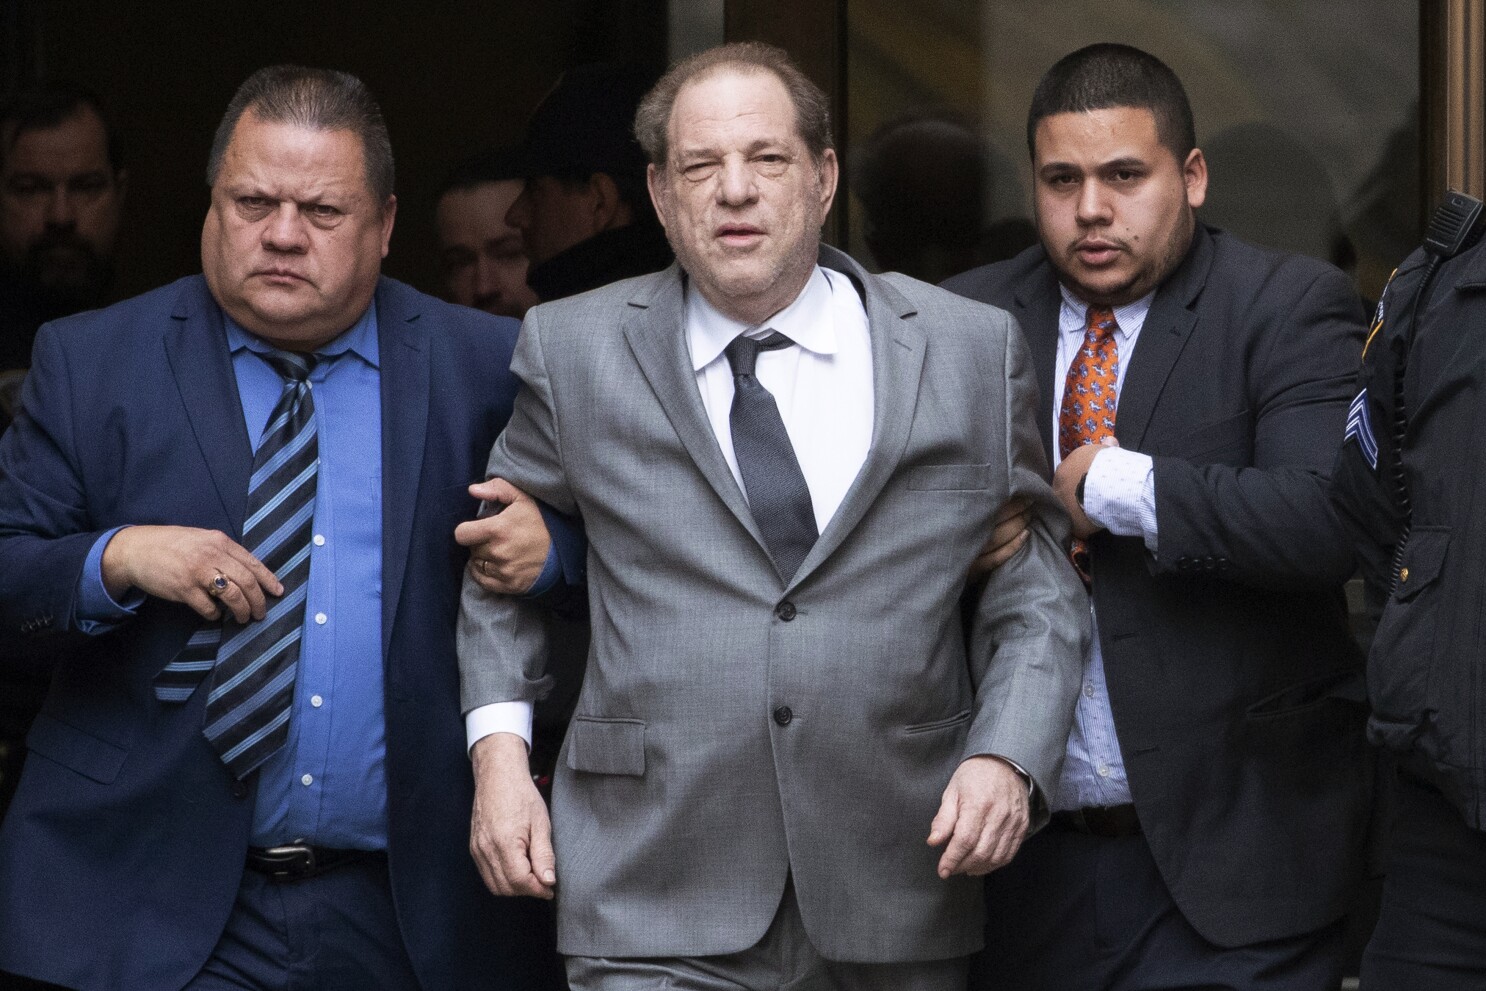 Weinstein being carried out of the court.